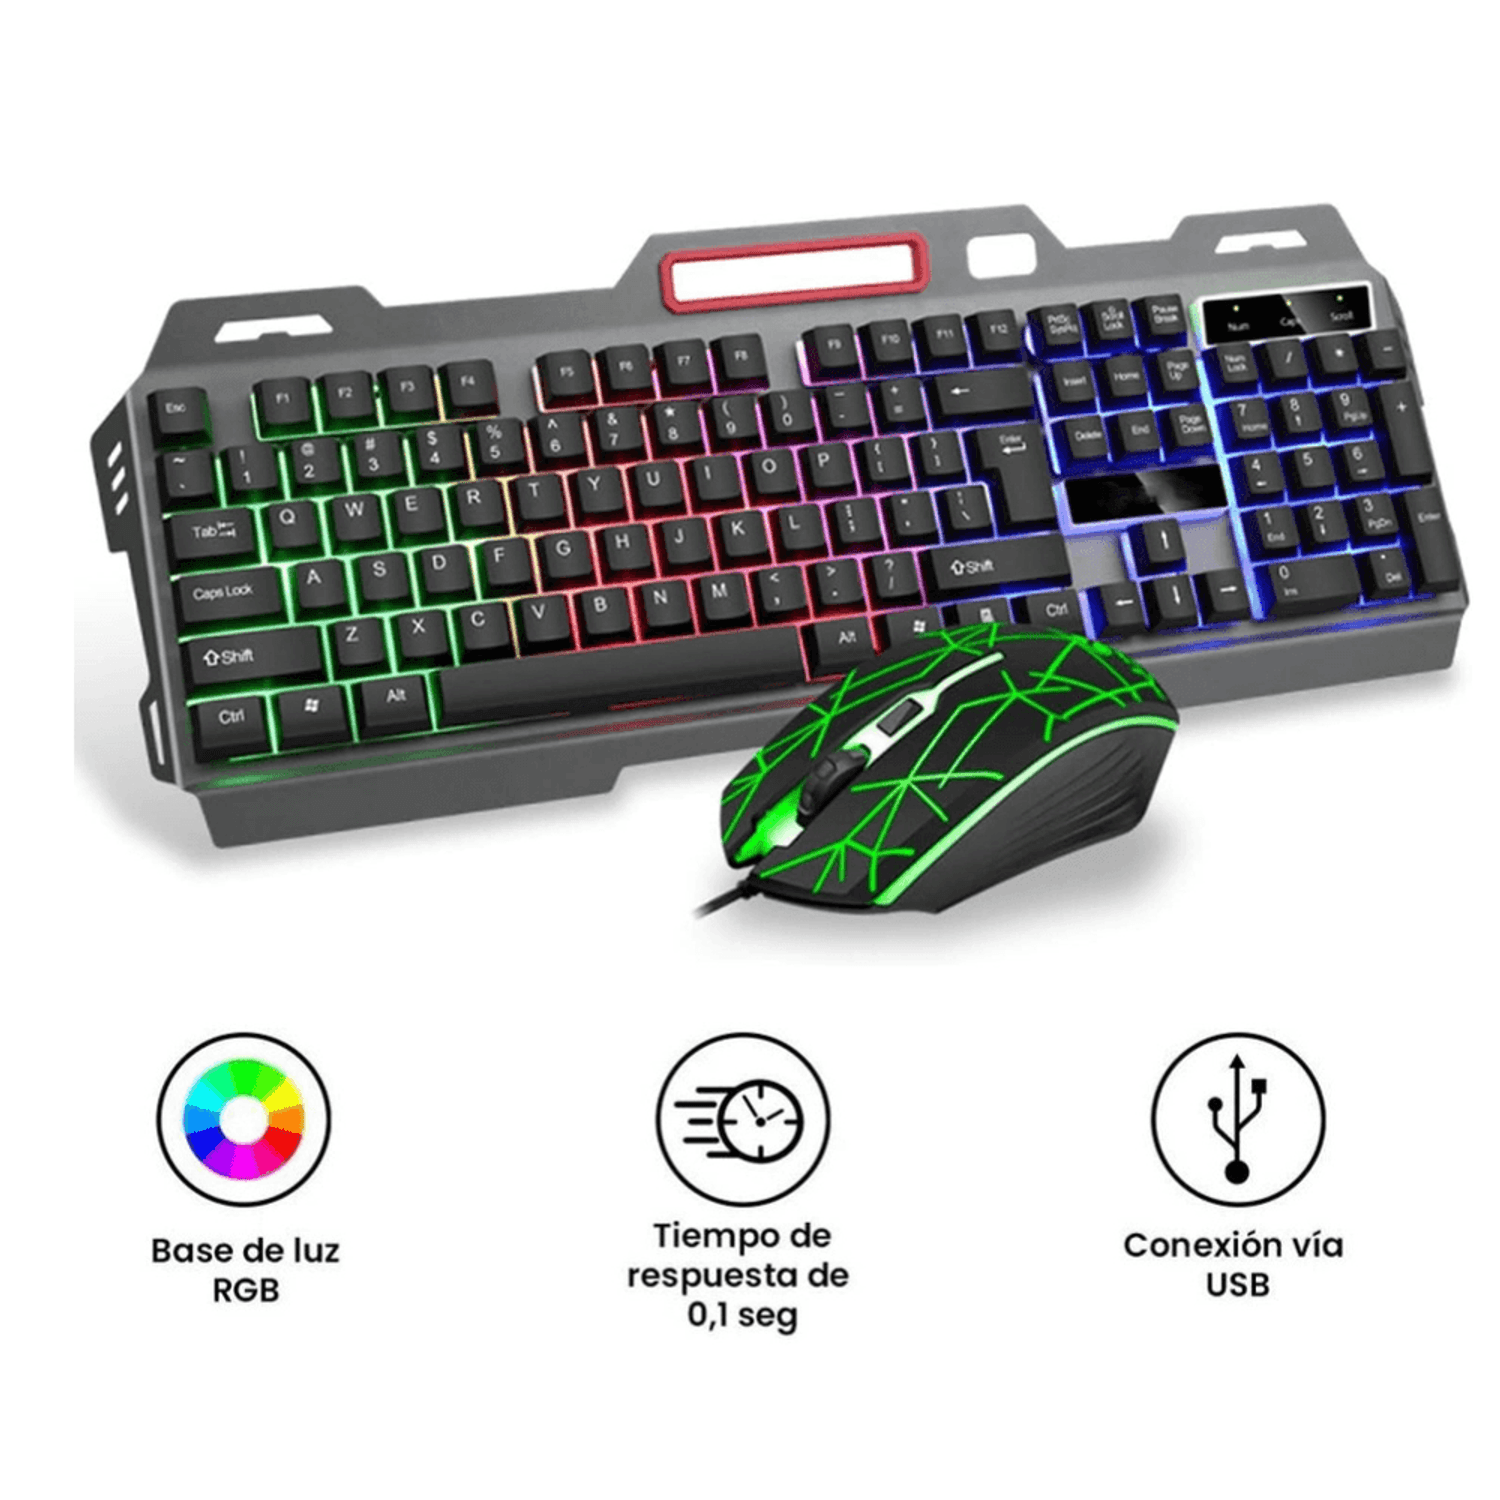 Kit gamer teclado, mouse y mouse pad By Micronics - Oechsle